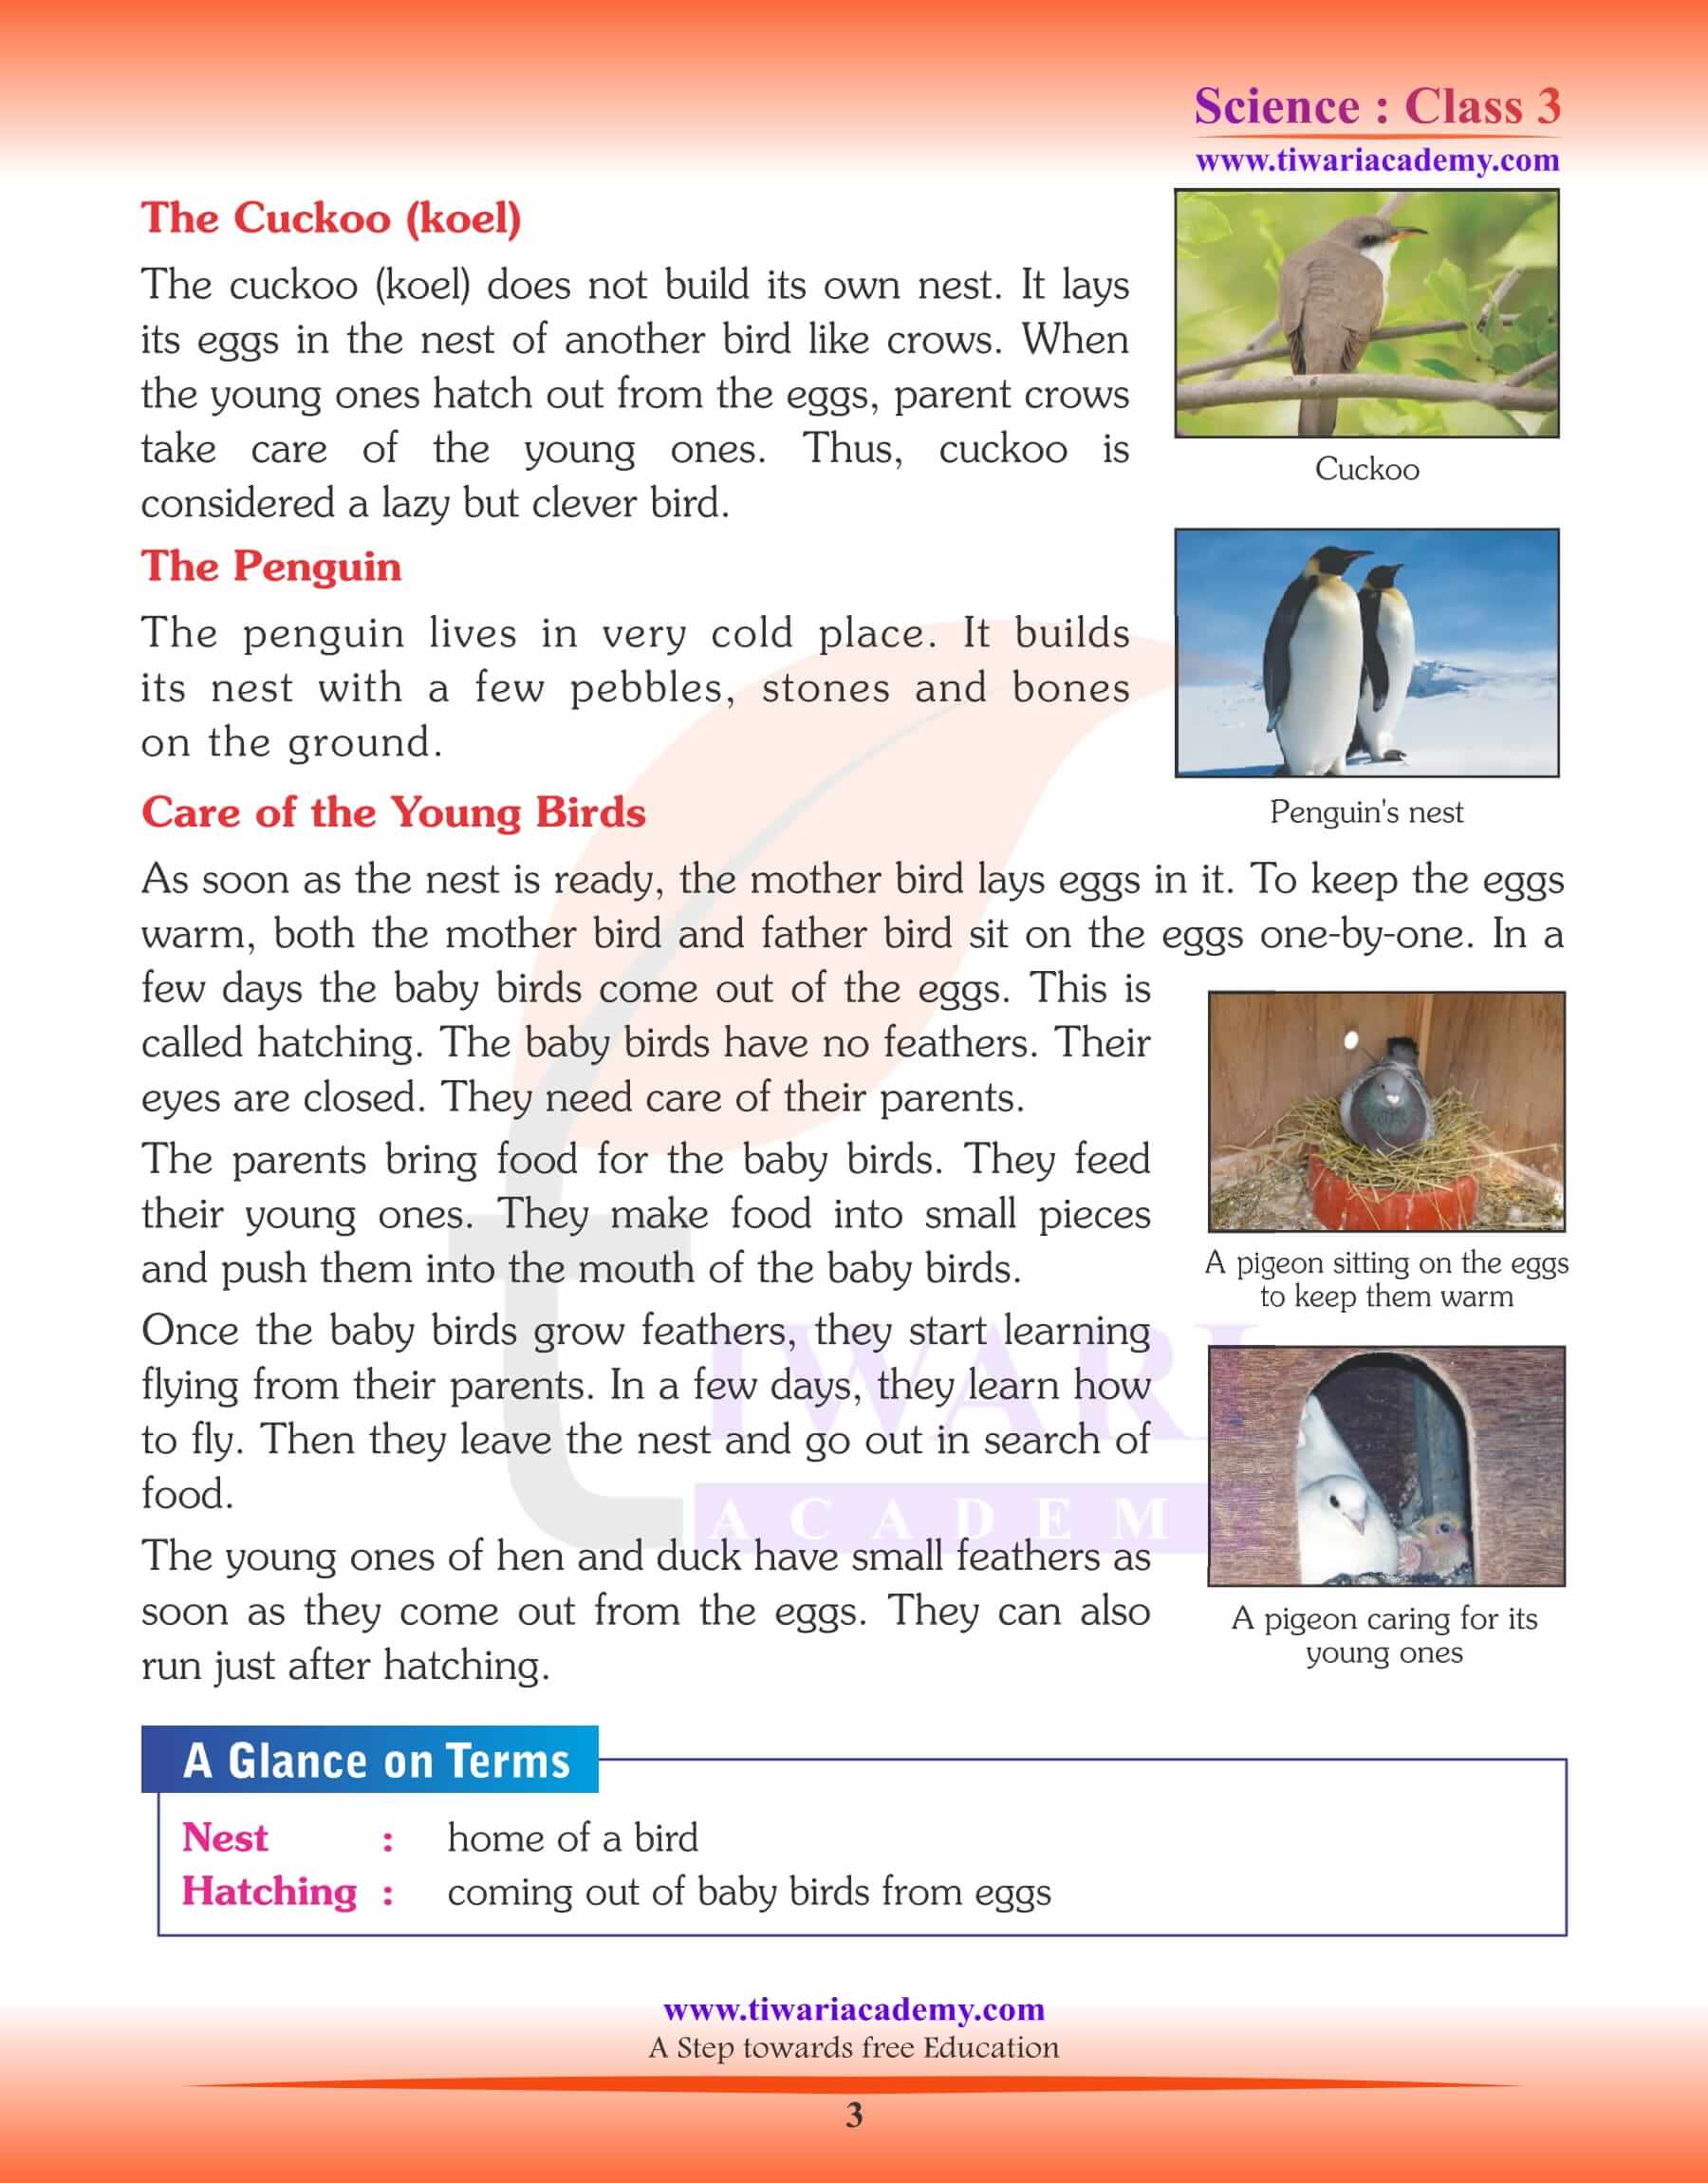 NCERT Solutions for Class 3 Science Chapter 4 Nestling Habits of Birds